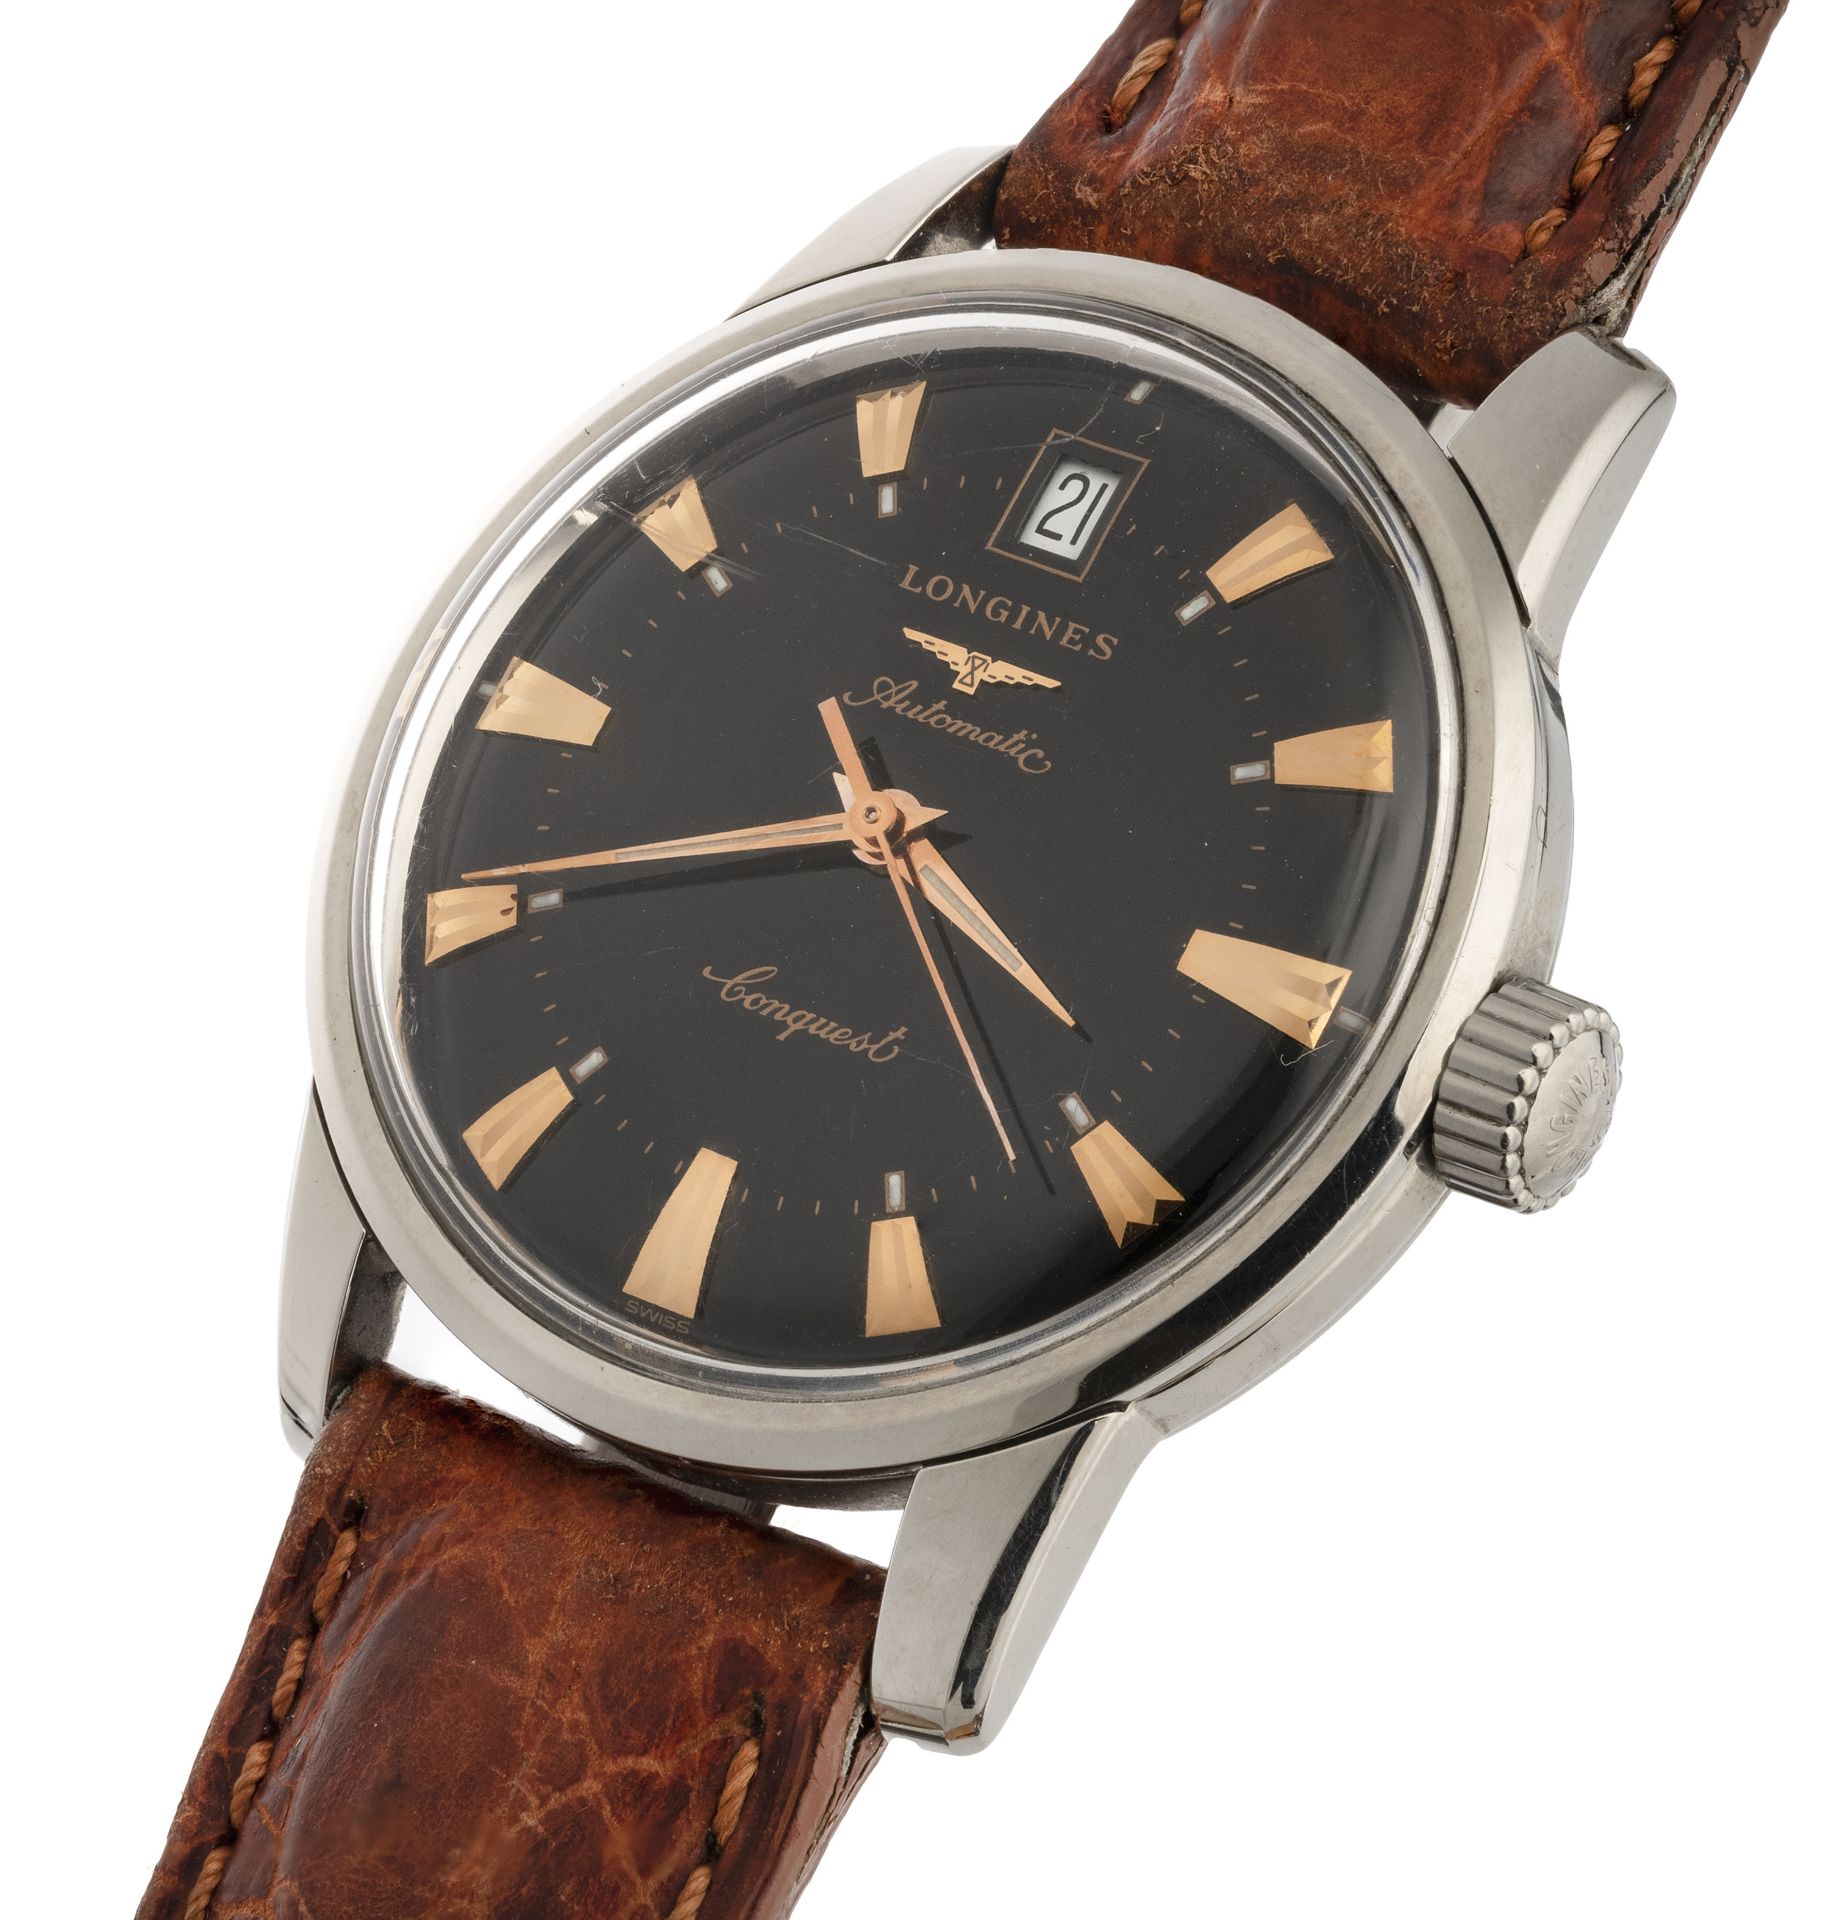 STEEL LONGINES CONQUEST HERITAGE WRISTWATCH - Image 2 of 3